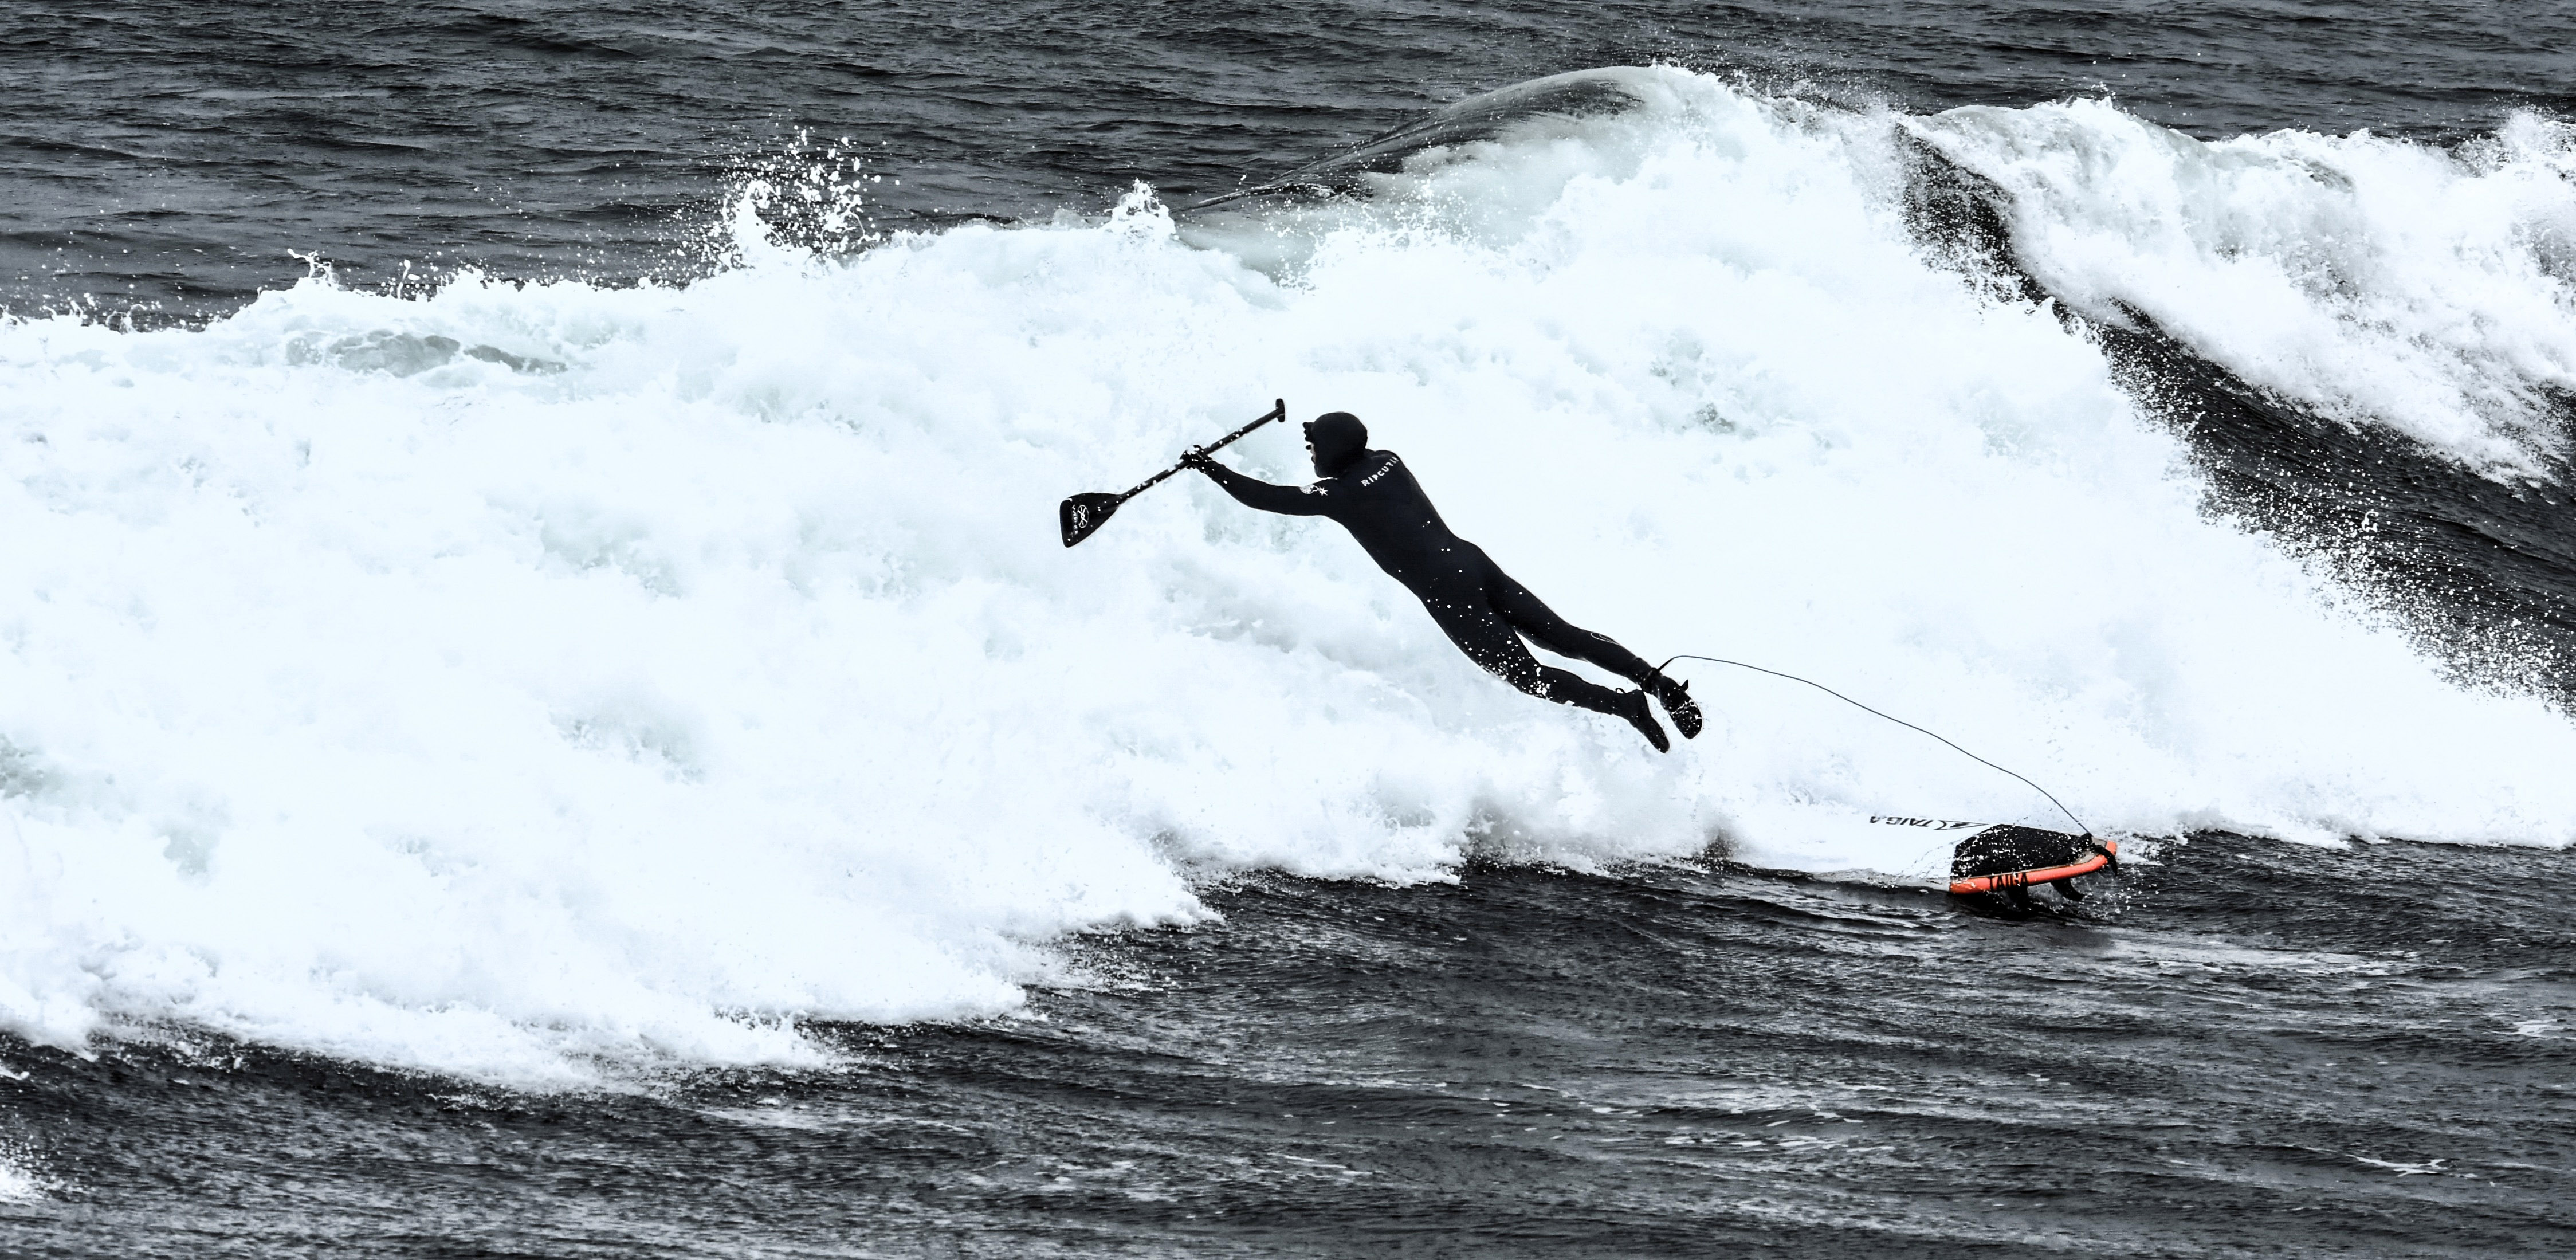 Surfer Wiping out on Wave image - Free stock photo - Public Domain ...